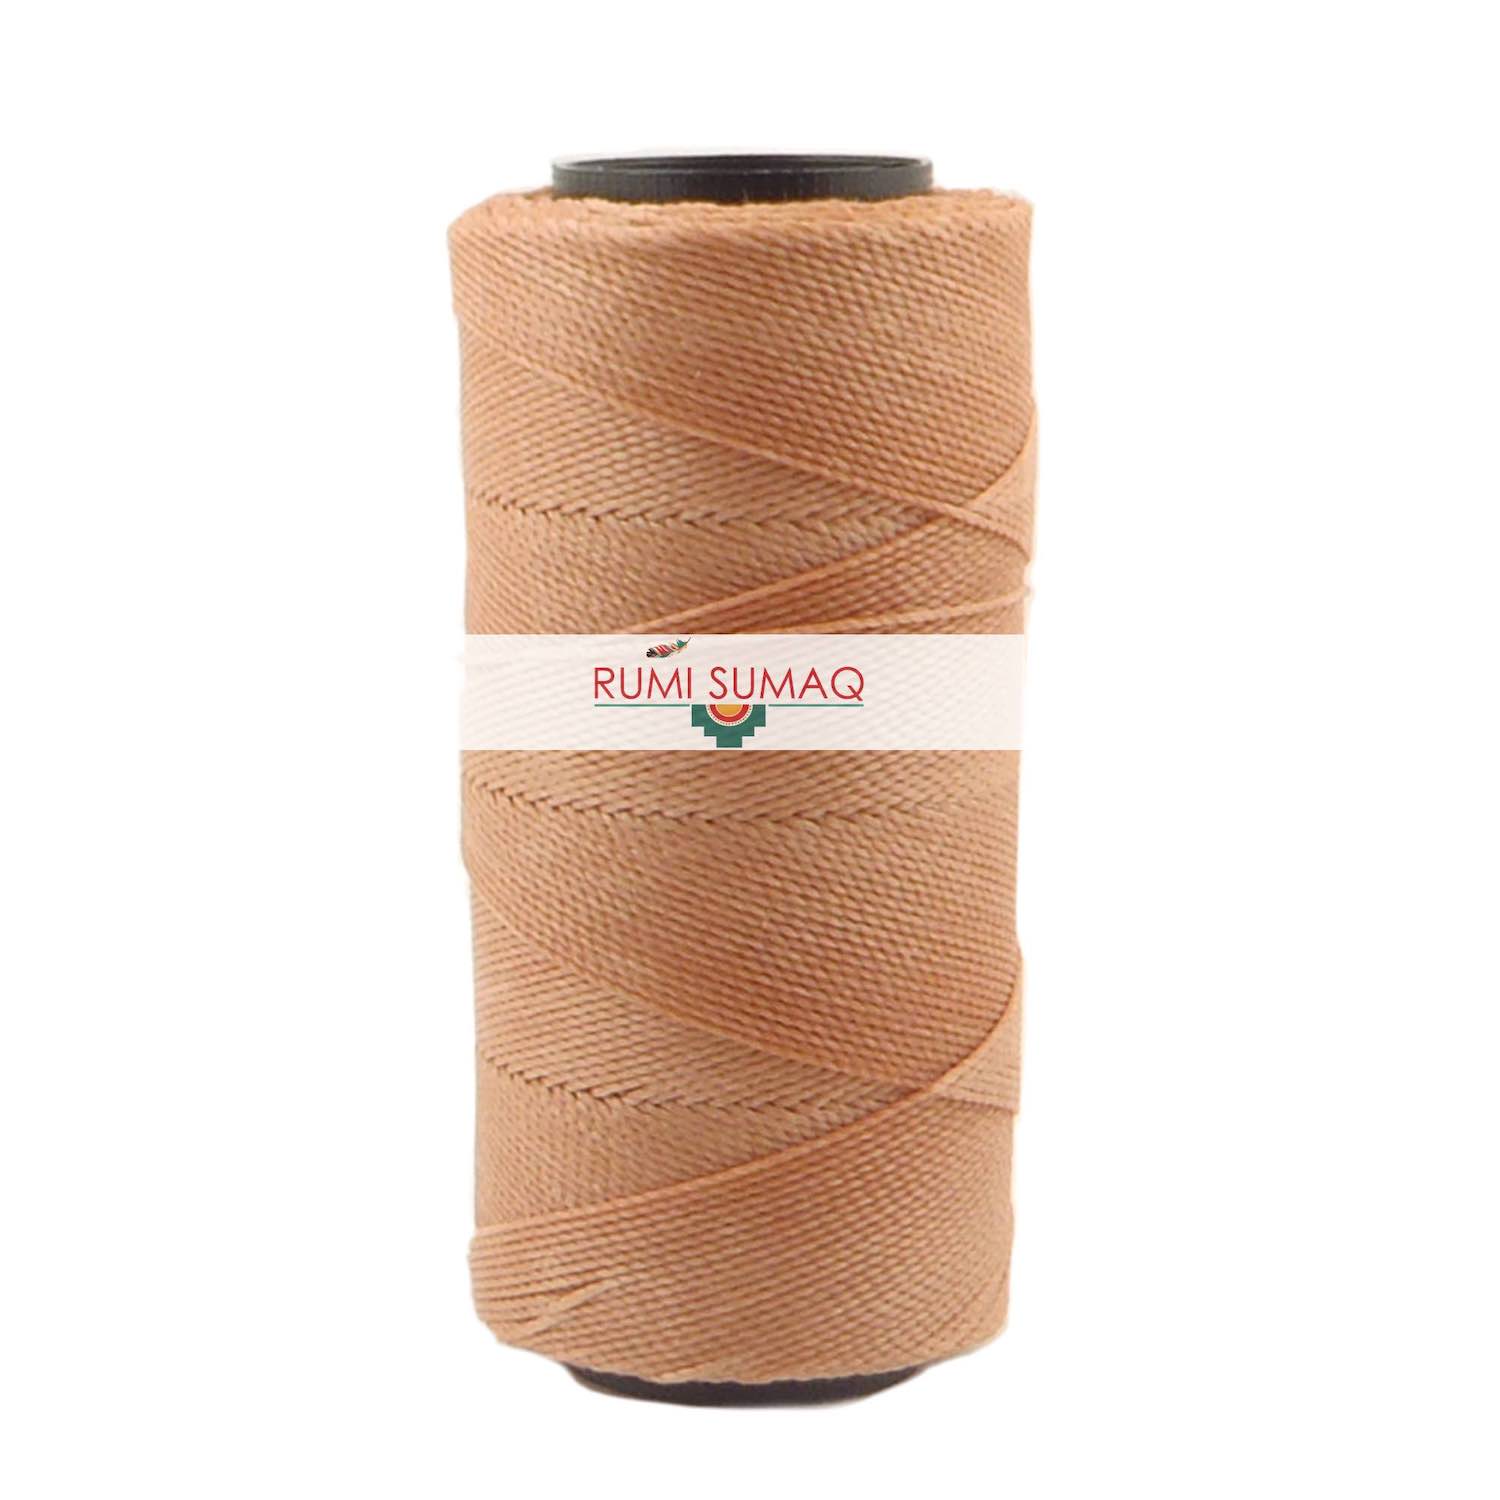 Settanyl Waxed Cord 06-550 Terra Rosa | Rumi Sumaq Waxed Threads for Basket Making, Macrame Knotting, Beading jewelry, Leather Working and Quilting